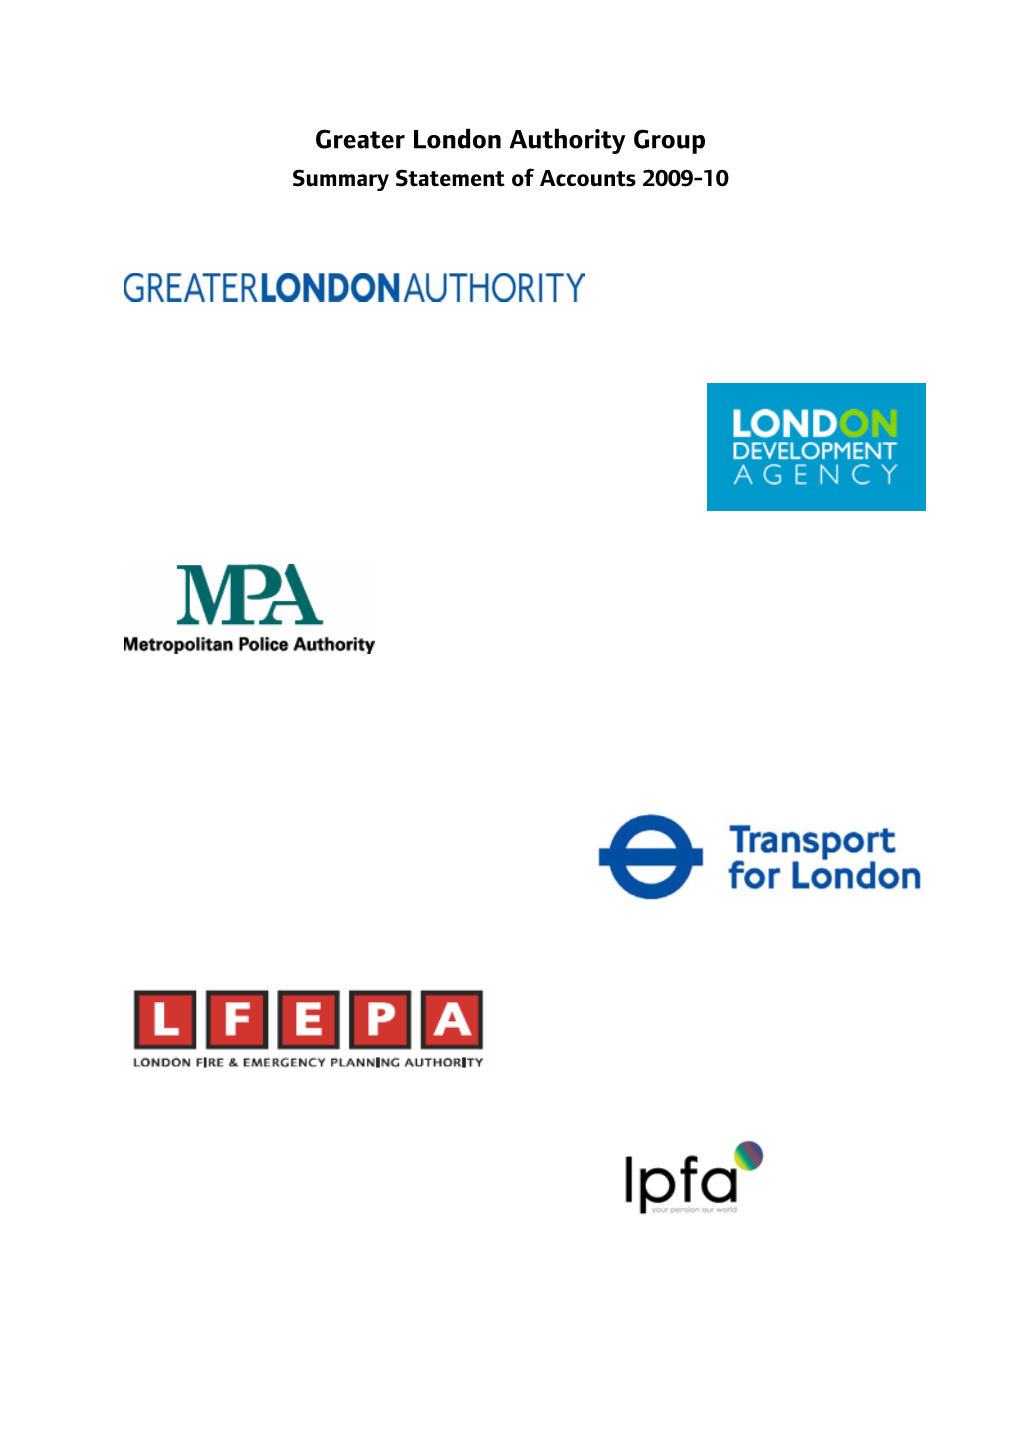 Greater London Authority Group Summary Statement of Accounts 2009-10